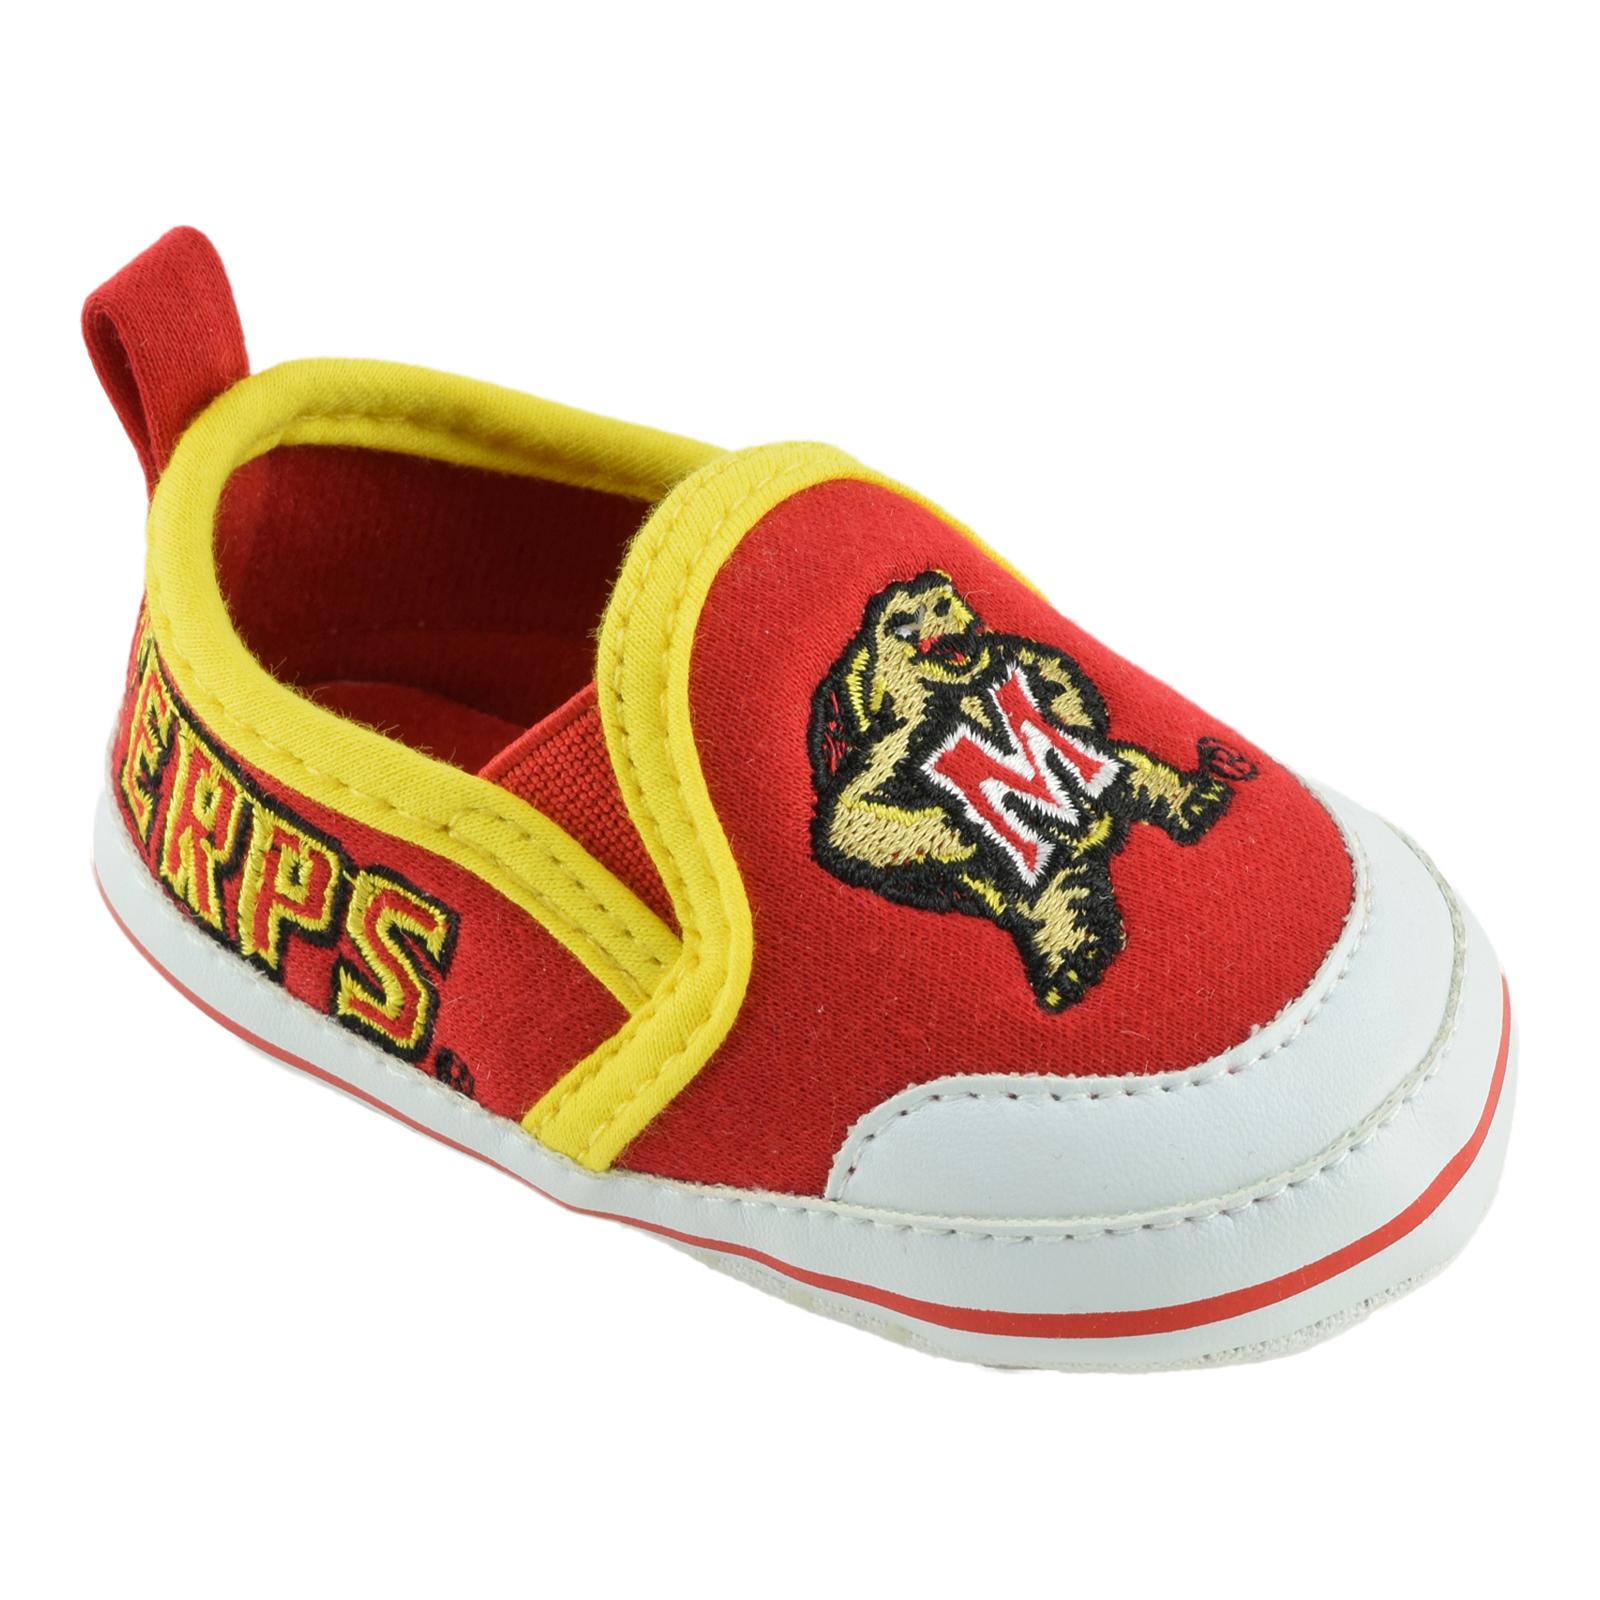 NCAA Newborn & Infant University of Maryland Terrapins Soft Sole Shoes